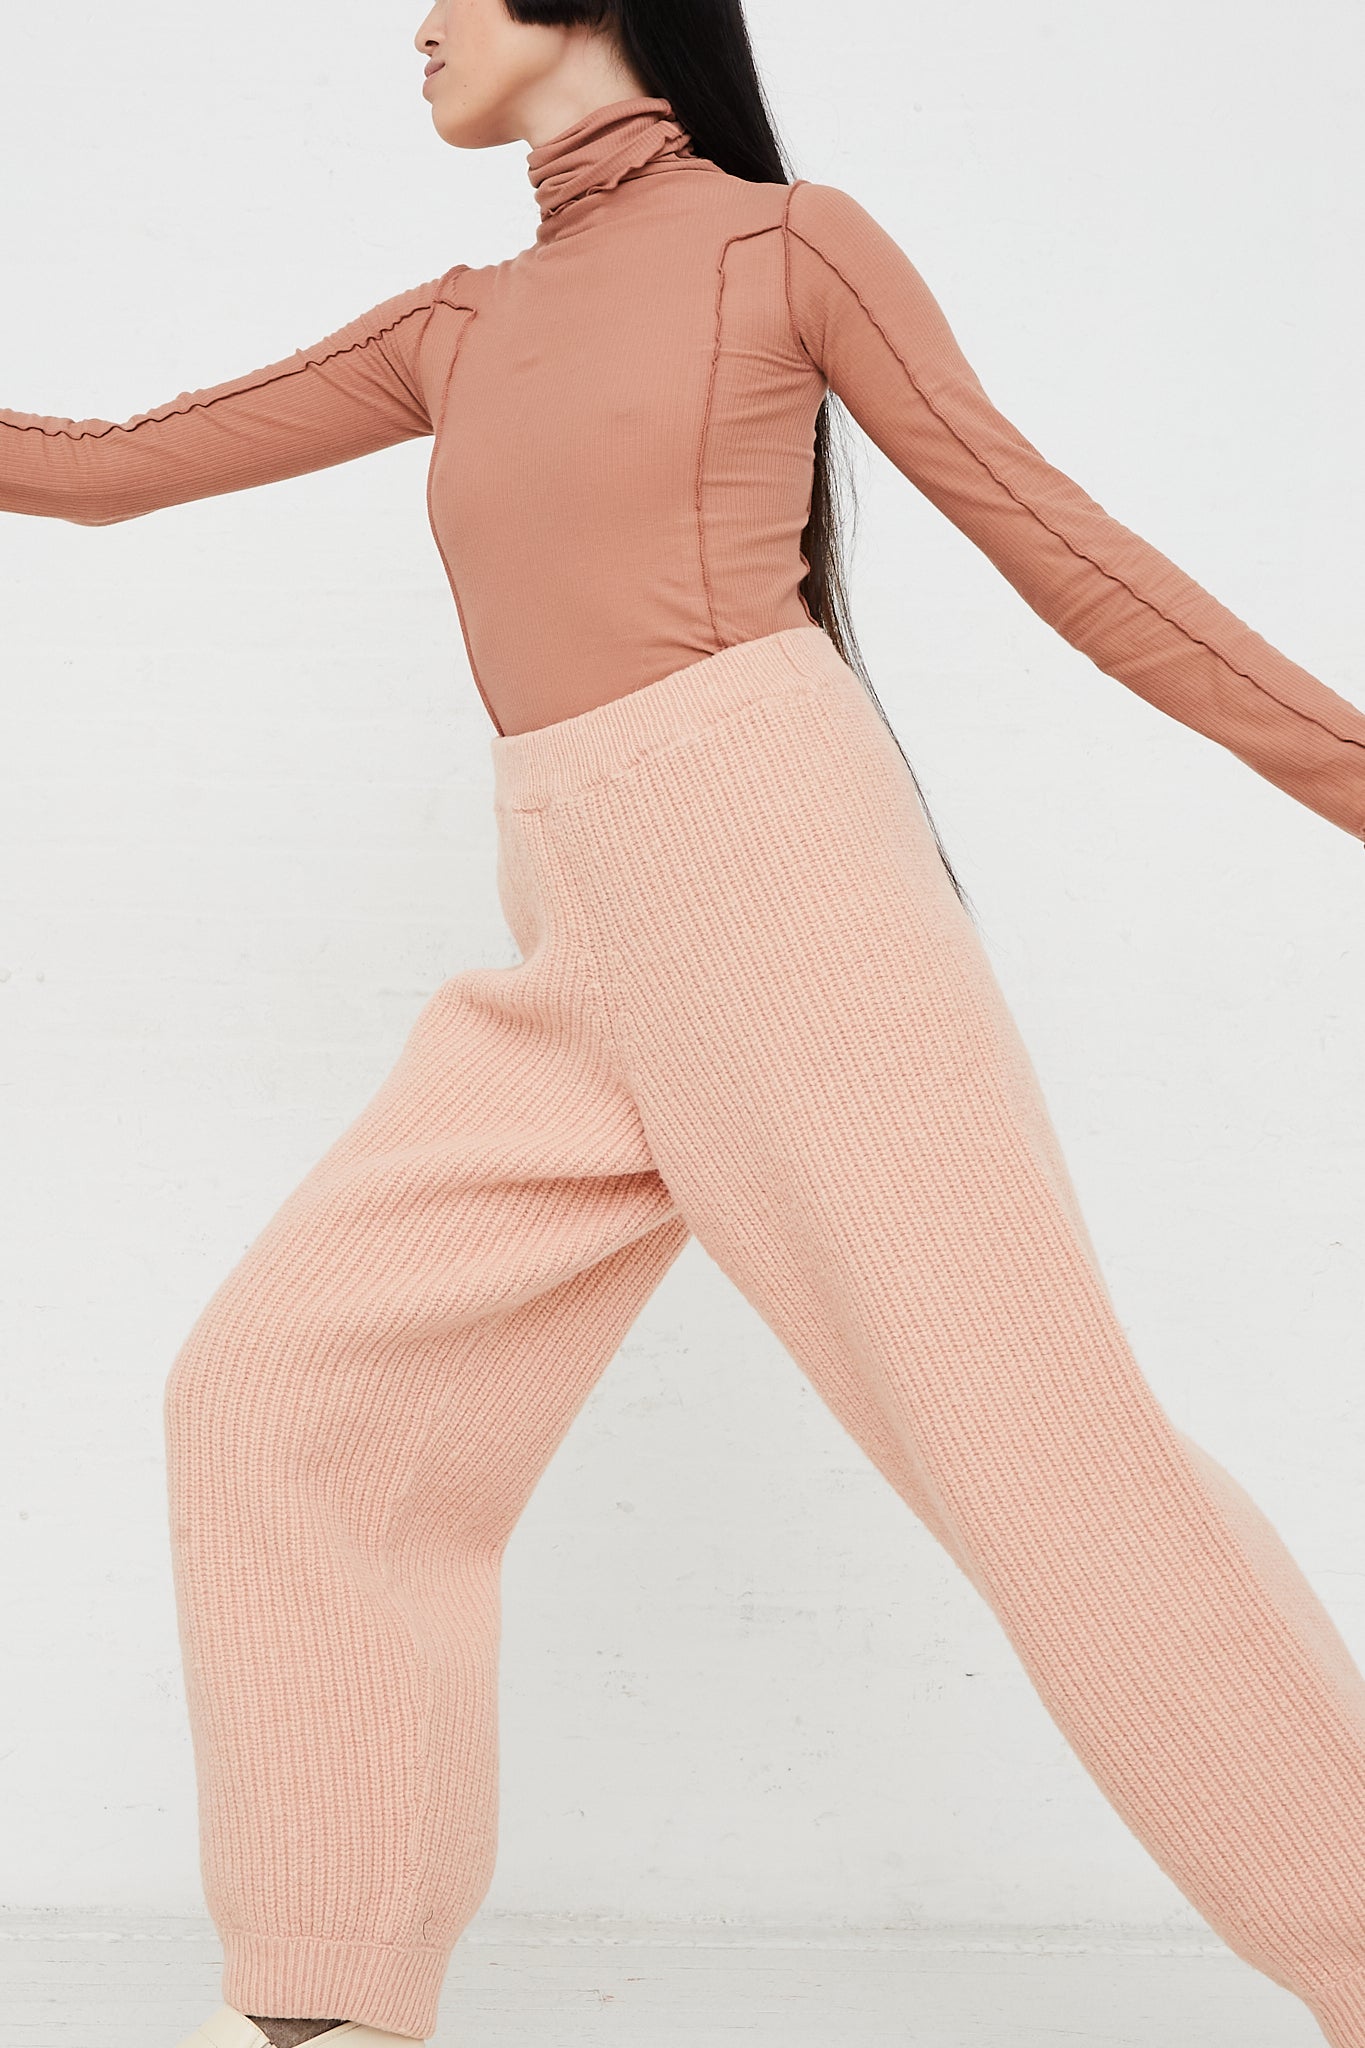 Mea Rib Knit Pant in Pink by Baserange for Oroboro Front Side